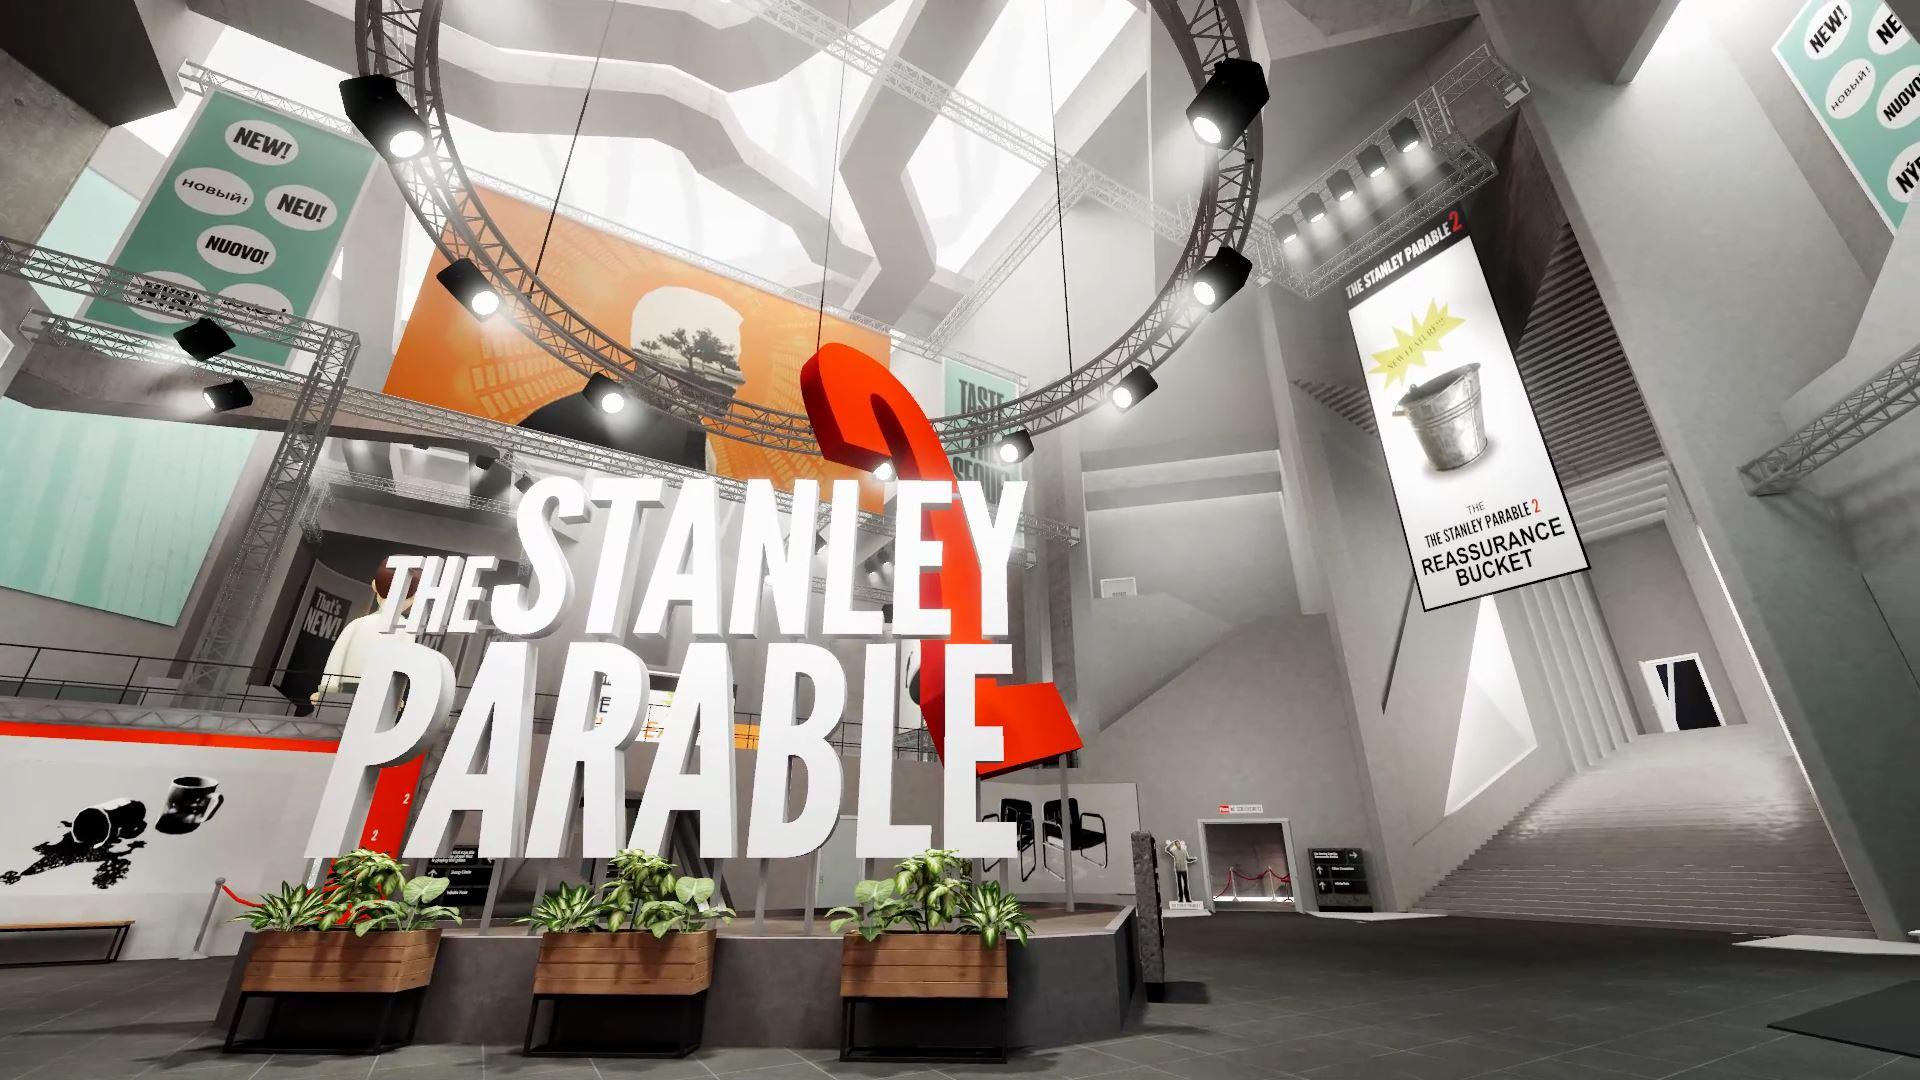 Stanley ultra deluxe. The Stanley Parable Стэнли. The Stanley Parable: Ultra Deluxe. Стэнли парабл 2. Игра the Stanley Parable.